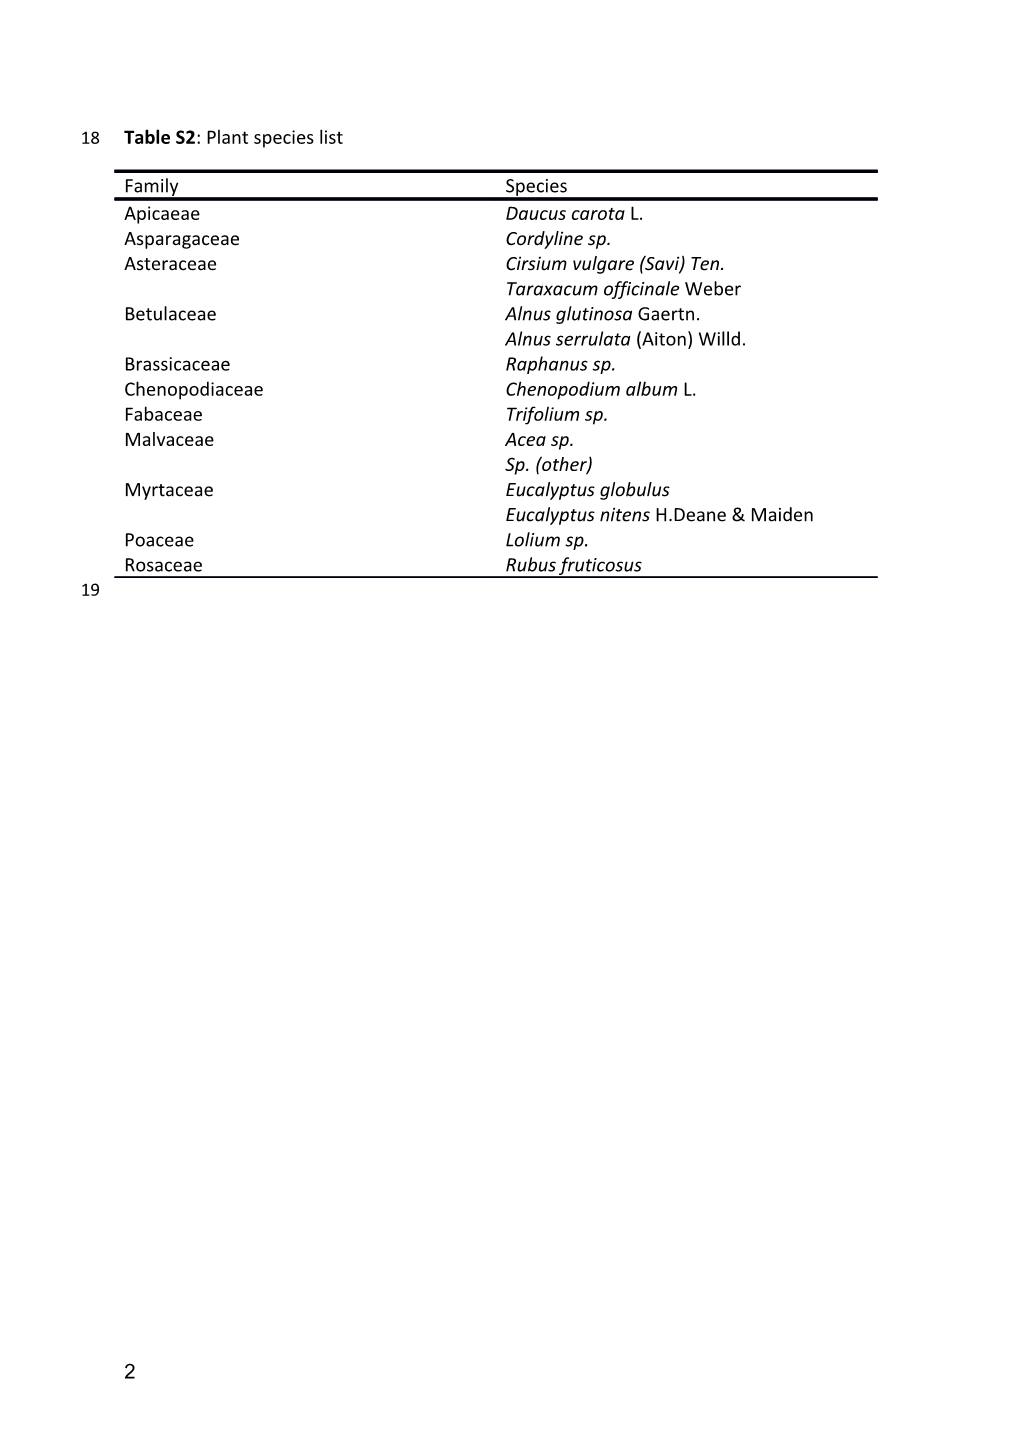 APPENDIX 1: Data Collection, Identification and Quantification Methods (From Eklöf Et